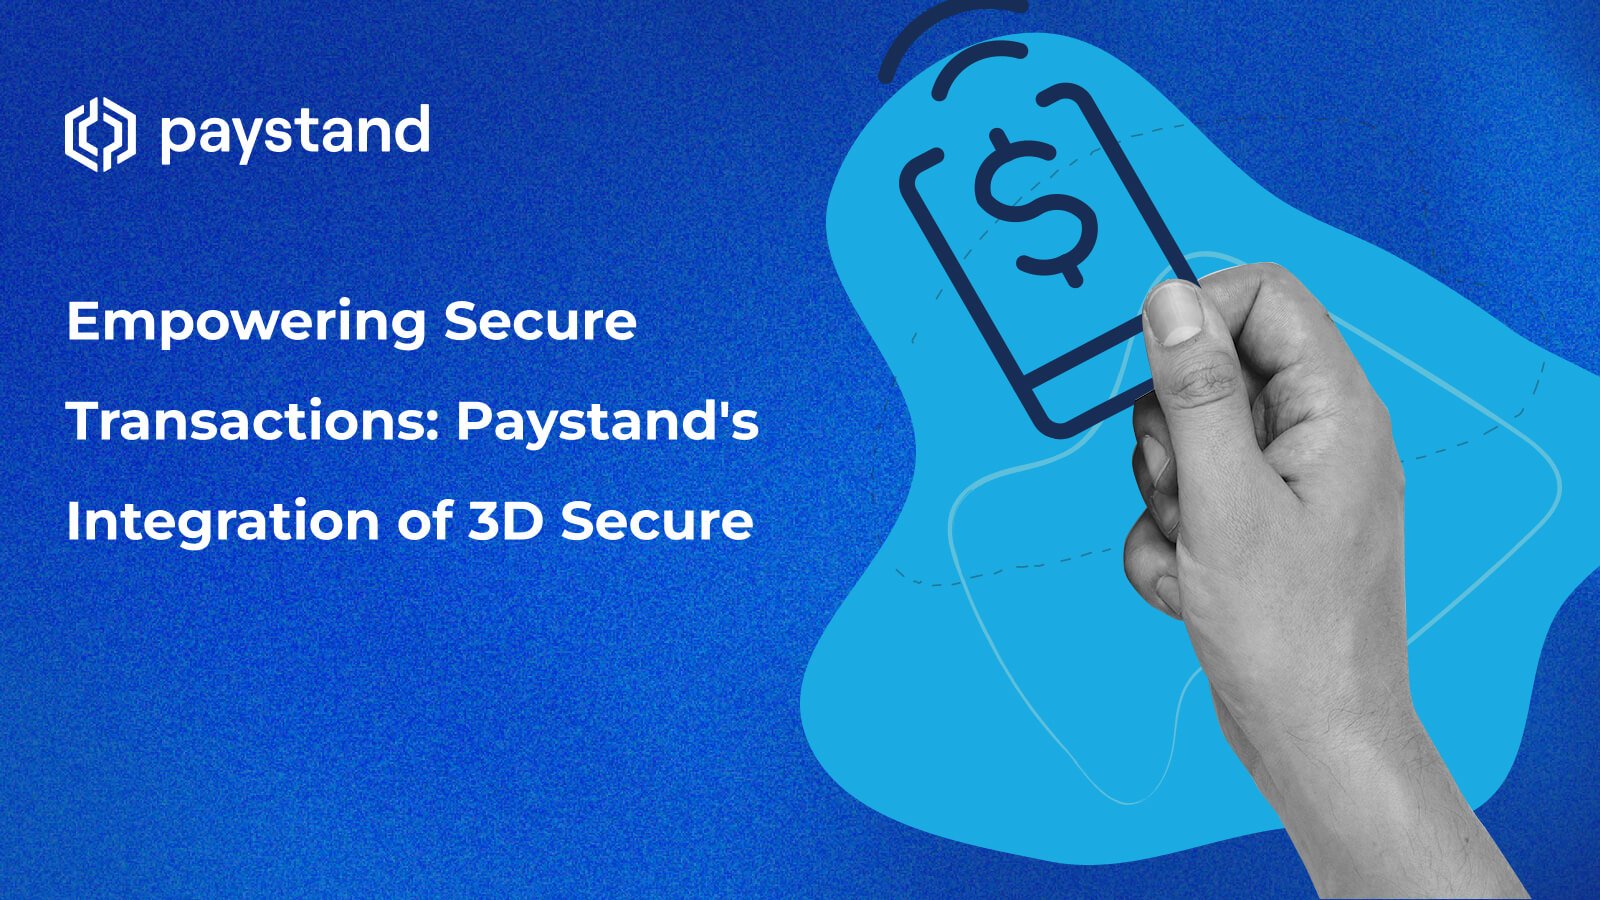 Empowering Secure Transactions: Paystand's Integration of 3D Secure